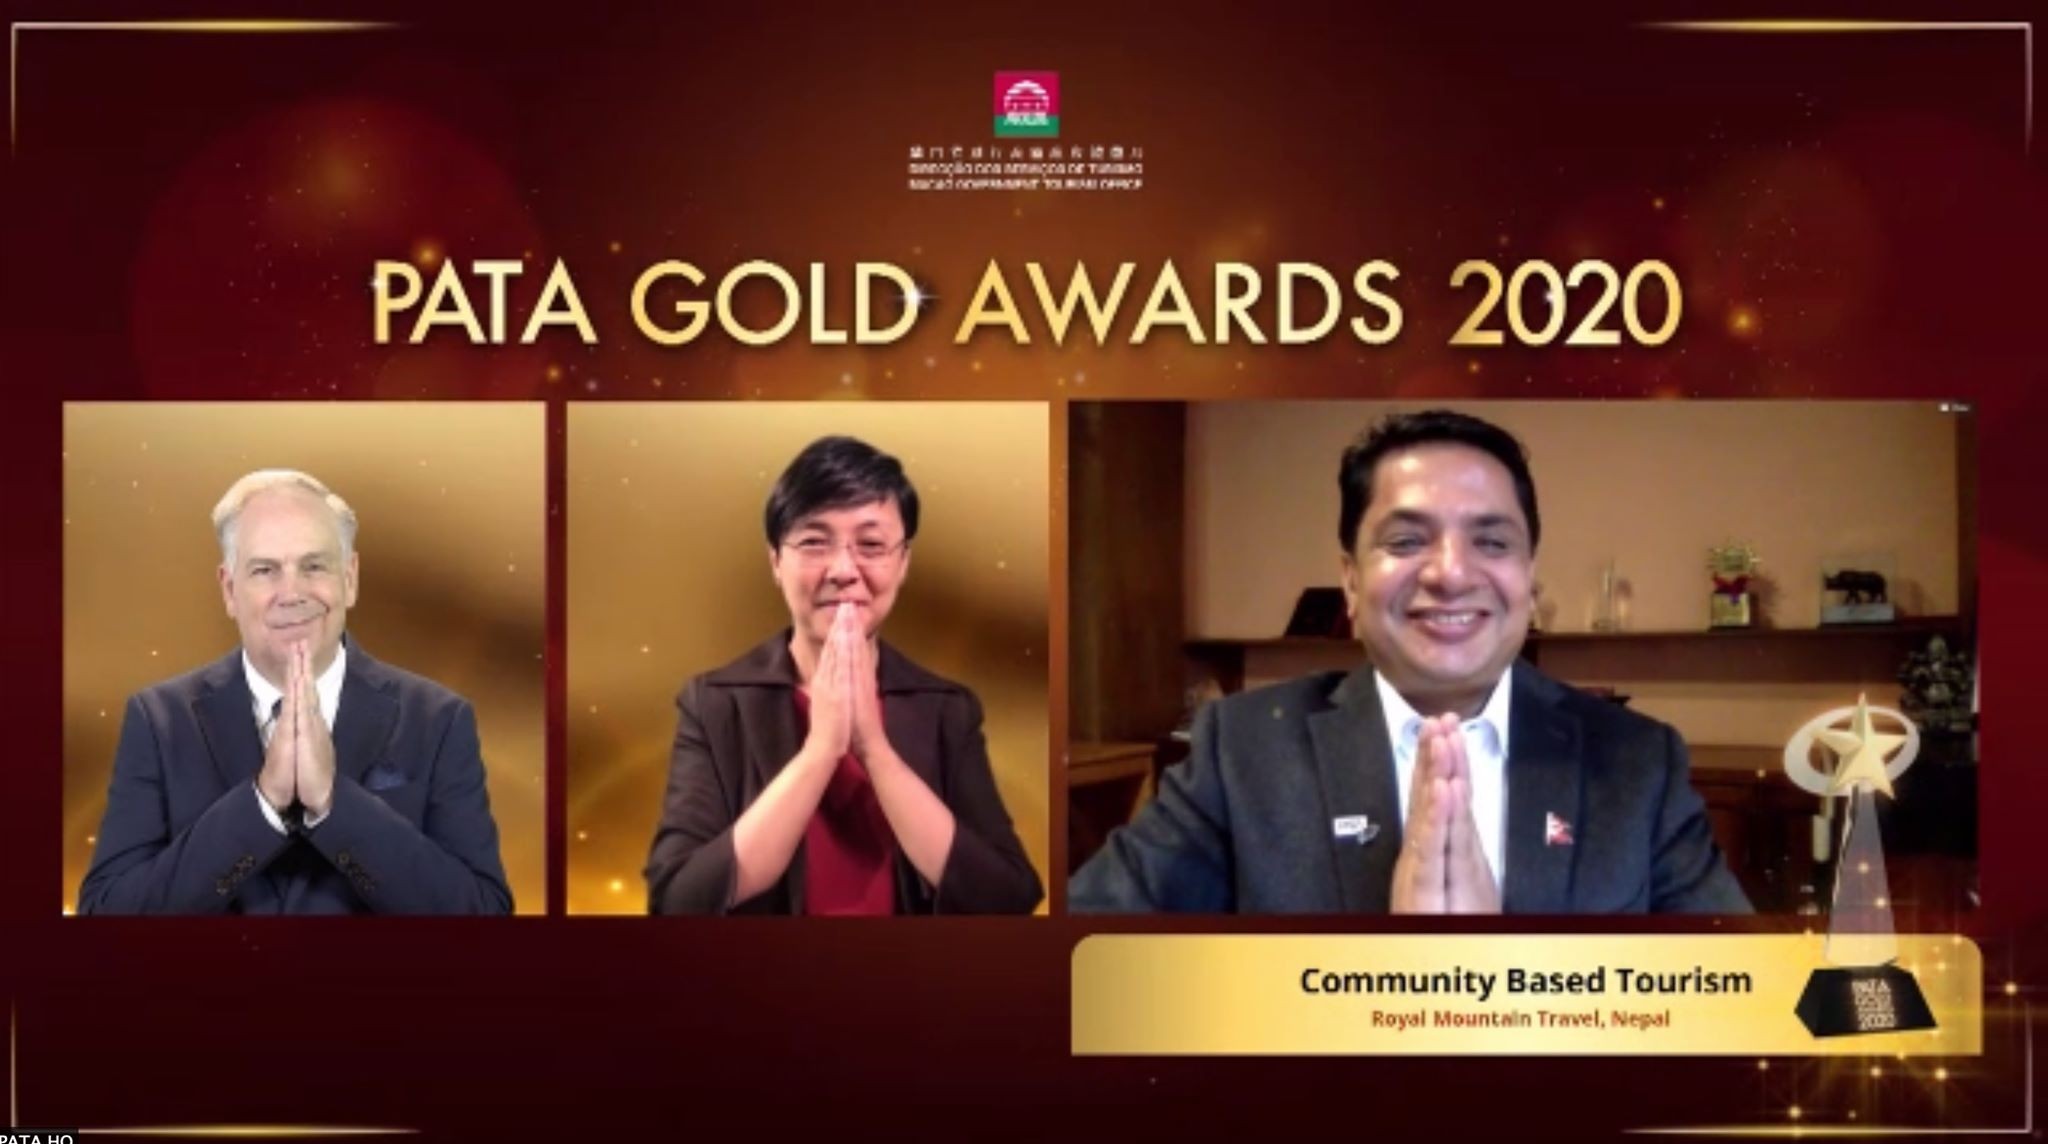 Community Homestay Network by Royal Mountain Travel-Nepal Wins the PATA Gold Award 2020 on Community Based Tourism